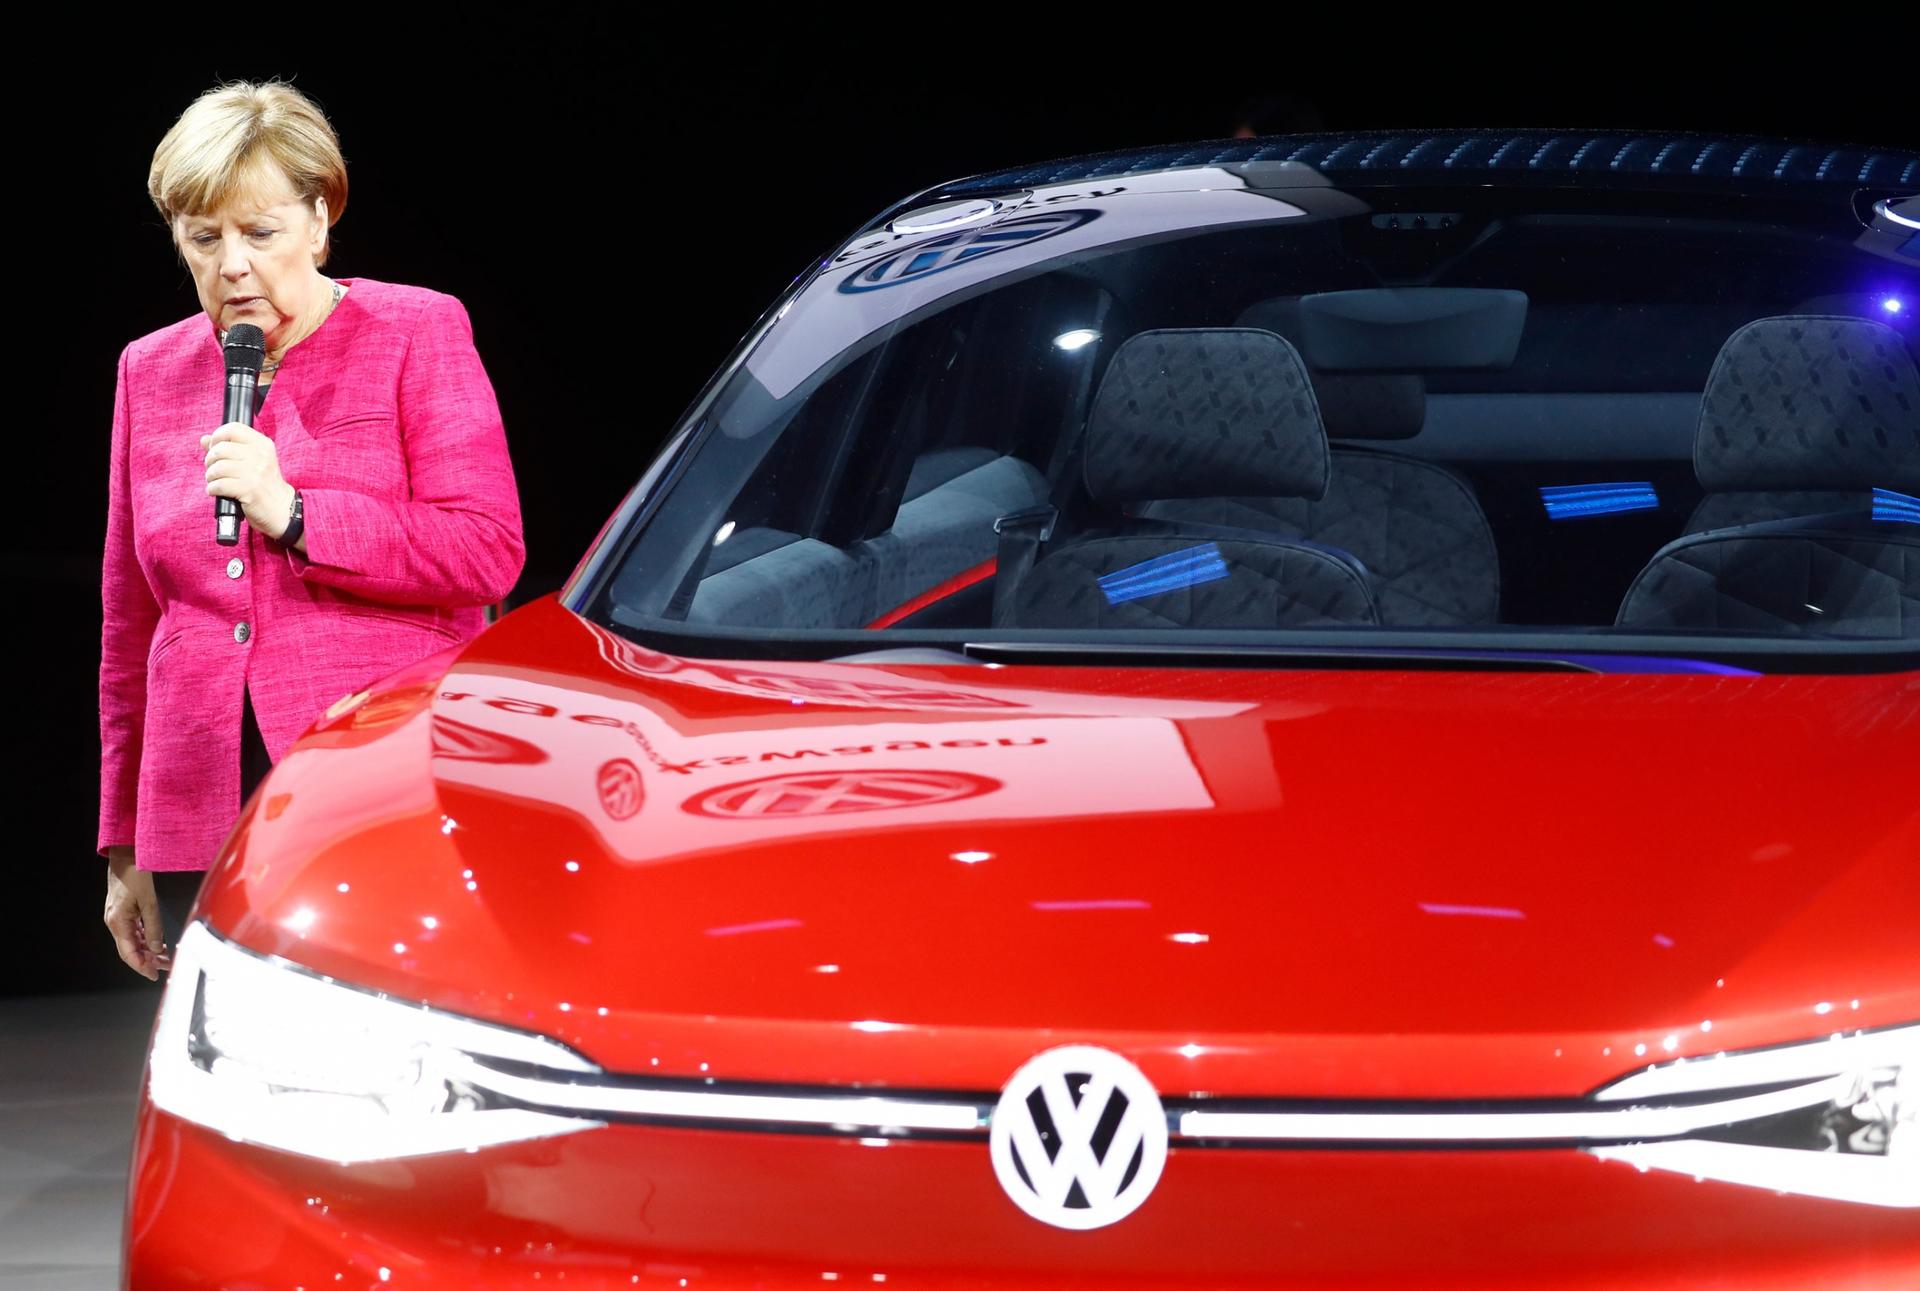 German chancellor Angela Merkel is shown wearing a pink jacket and standing next to a red VW car.